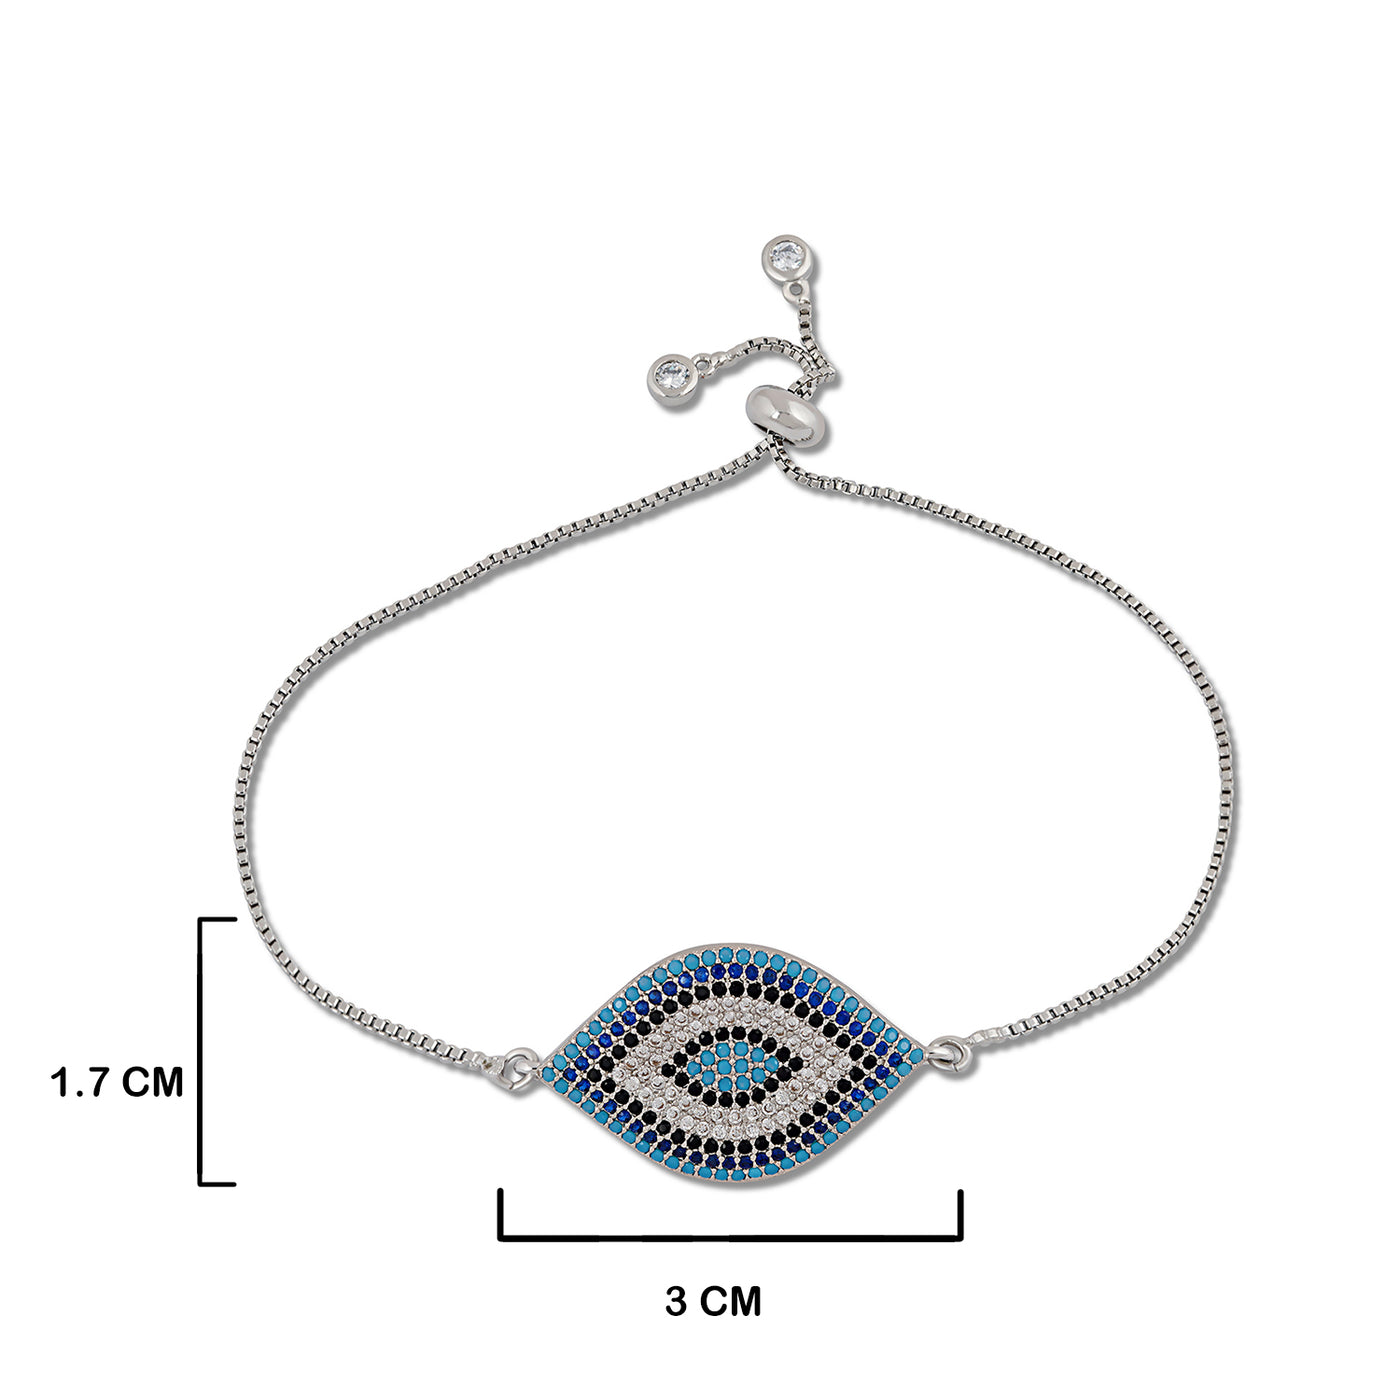 Colourful Beaded Evil Eye Bracelet with measurements in cm.